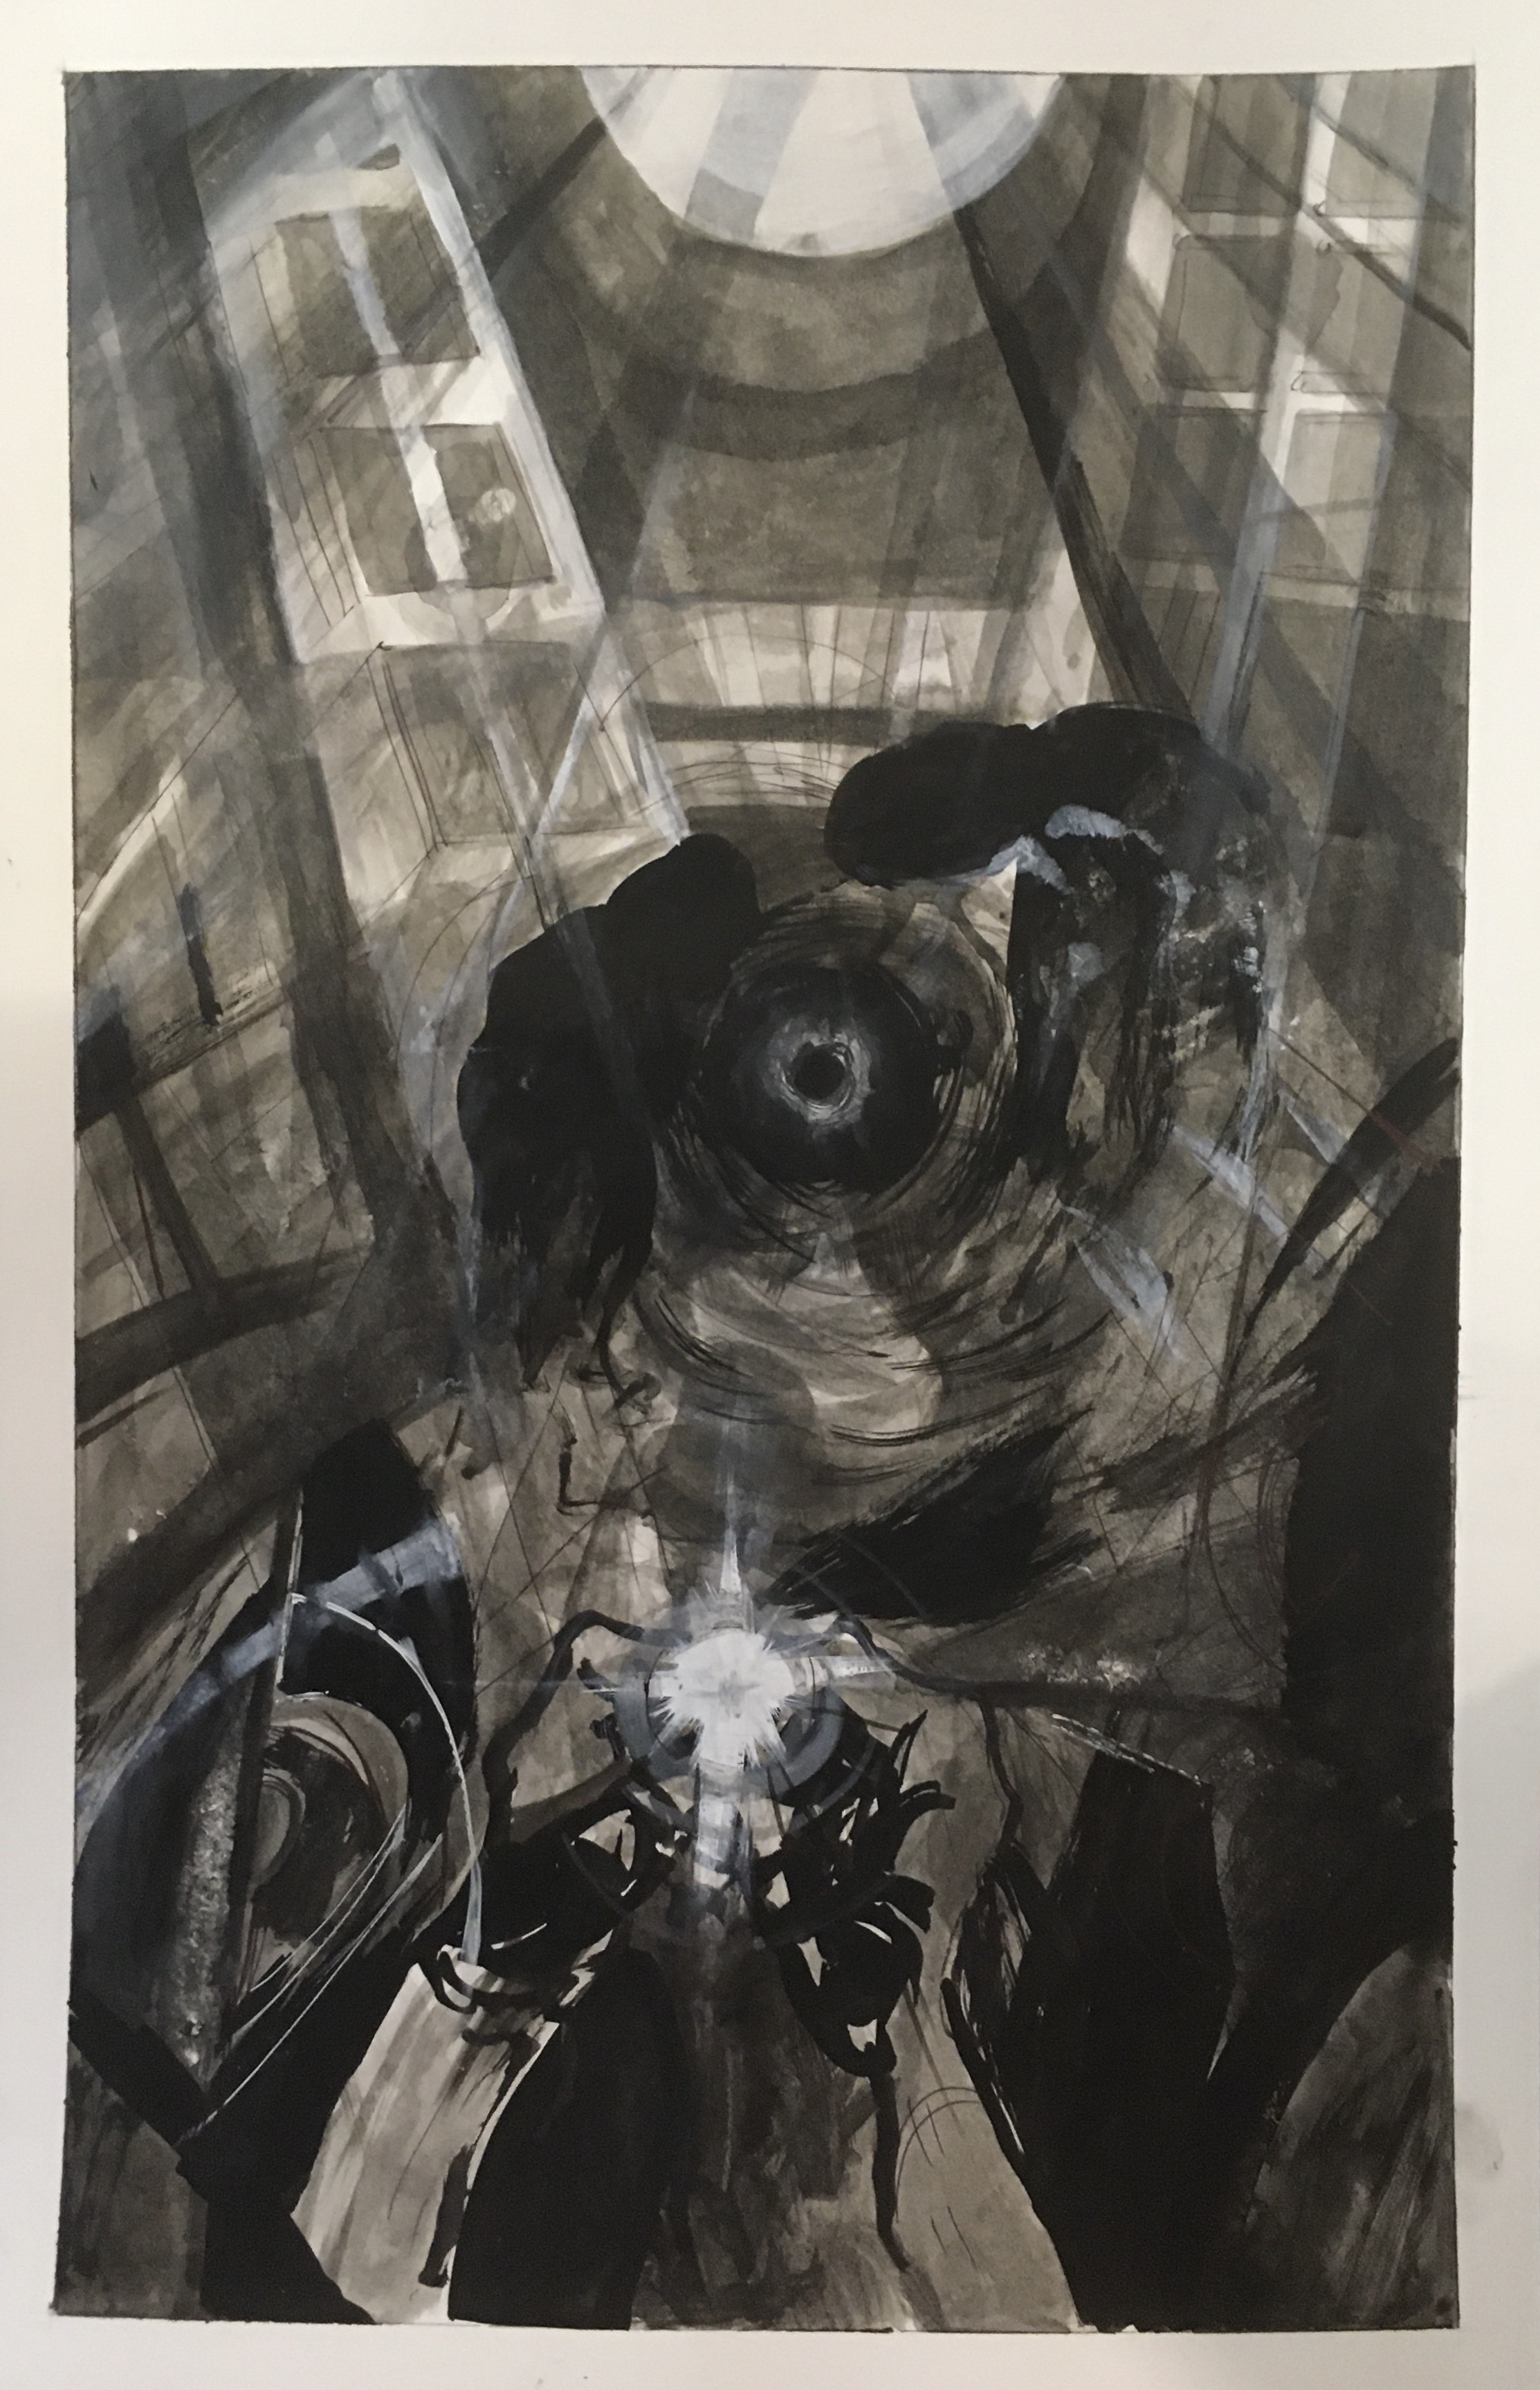 A black and white semi-abstract ink drawing containing a sun, a city, a point of light, and a swirling dark mass.